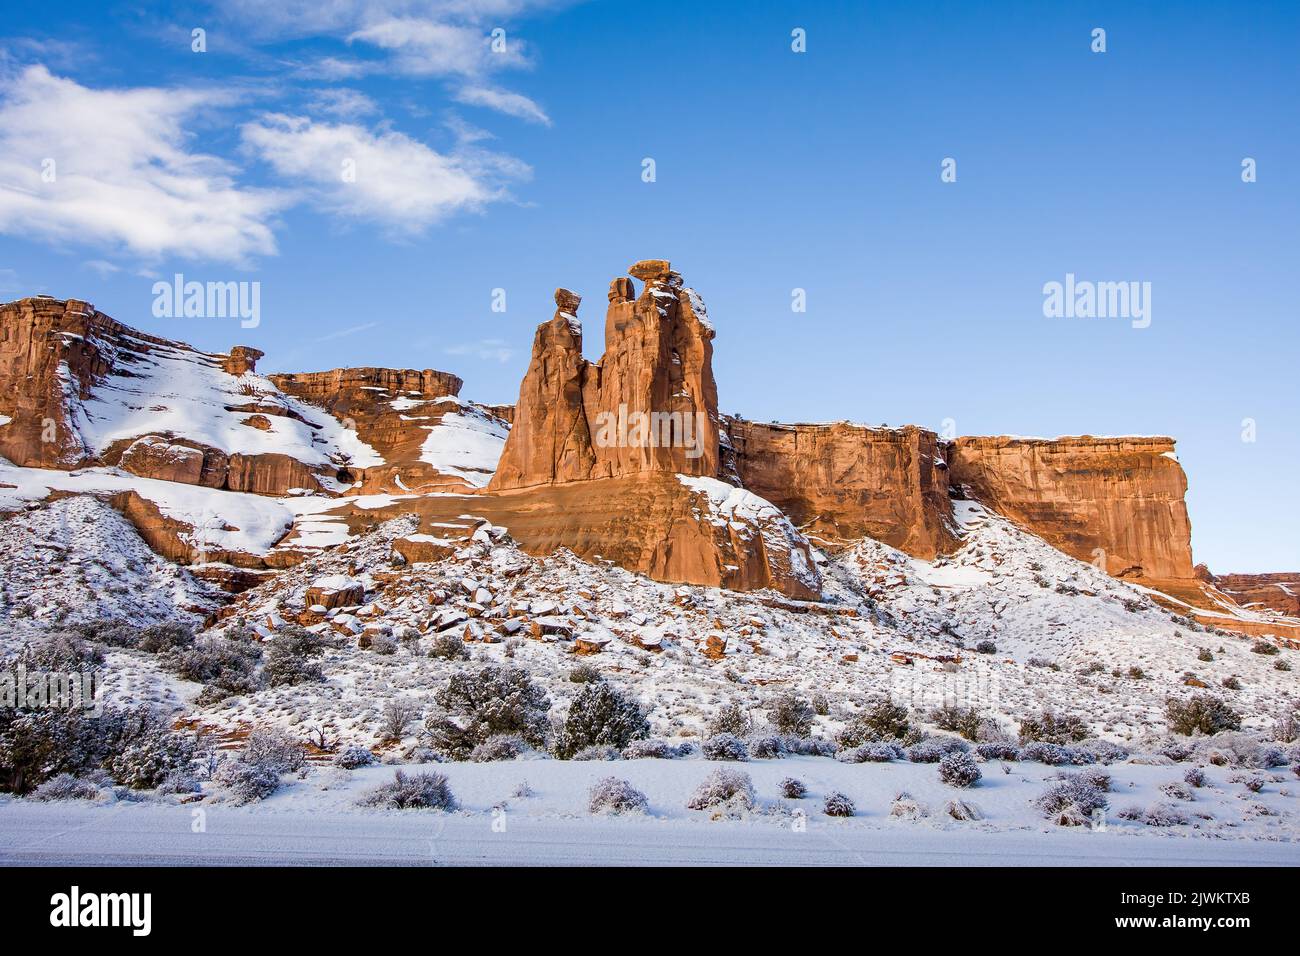 The hoodoos known as the Three Gossips in the Courthouse Towers with snow in winter.  Arches National Park, Moab, Utah. Stock Photo